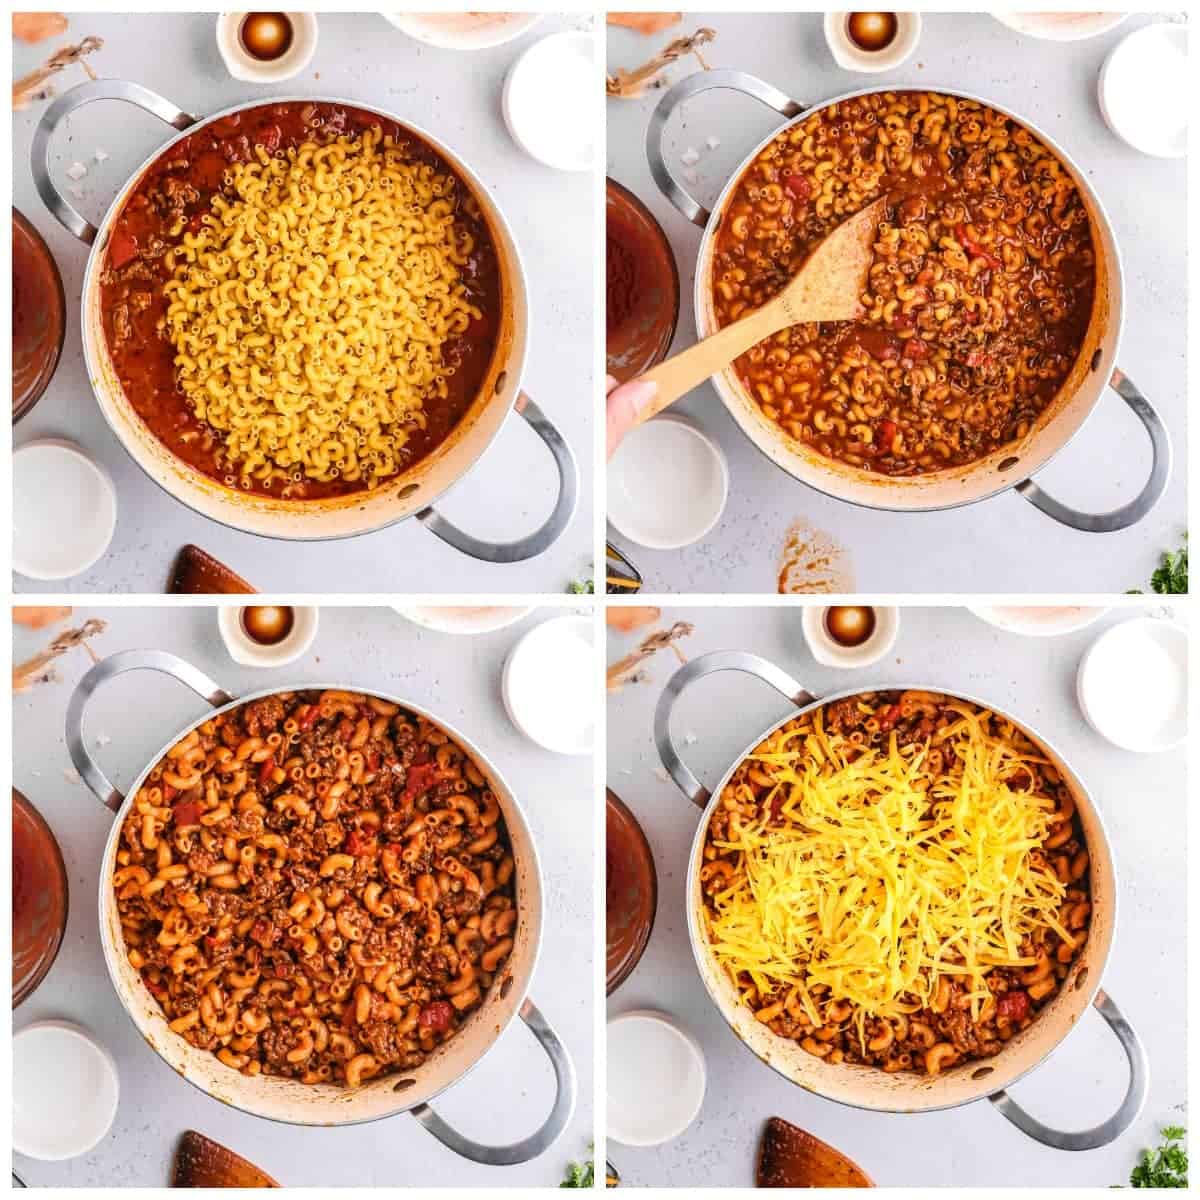 Four process photos. First one, pasta sauce with dried pasta dumped on top. Second one, everything simmering with a wooden spoon. Third one, pasta cooed and mixed together. Fourth one, Cheddar cheese being mixed in.